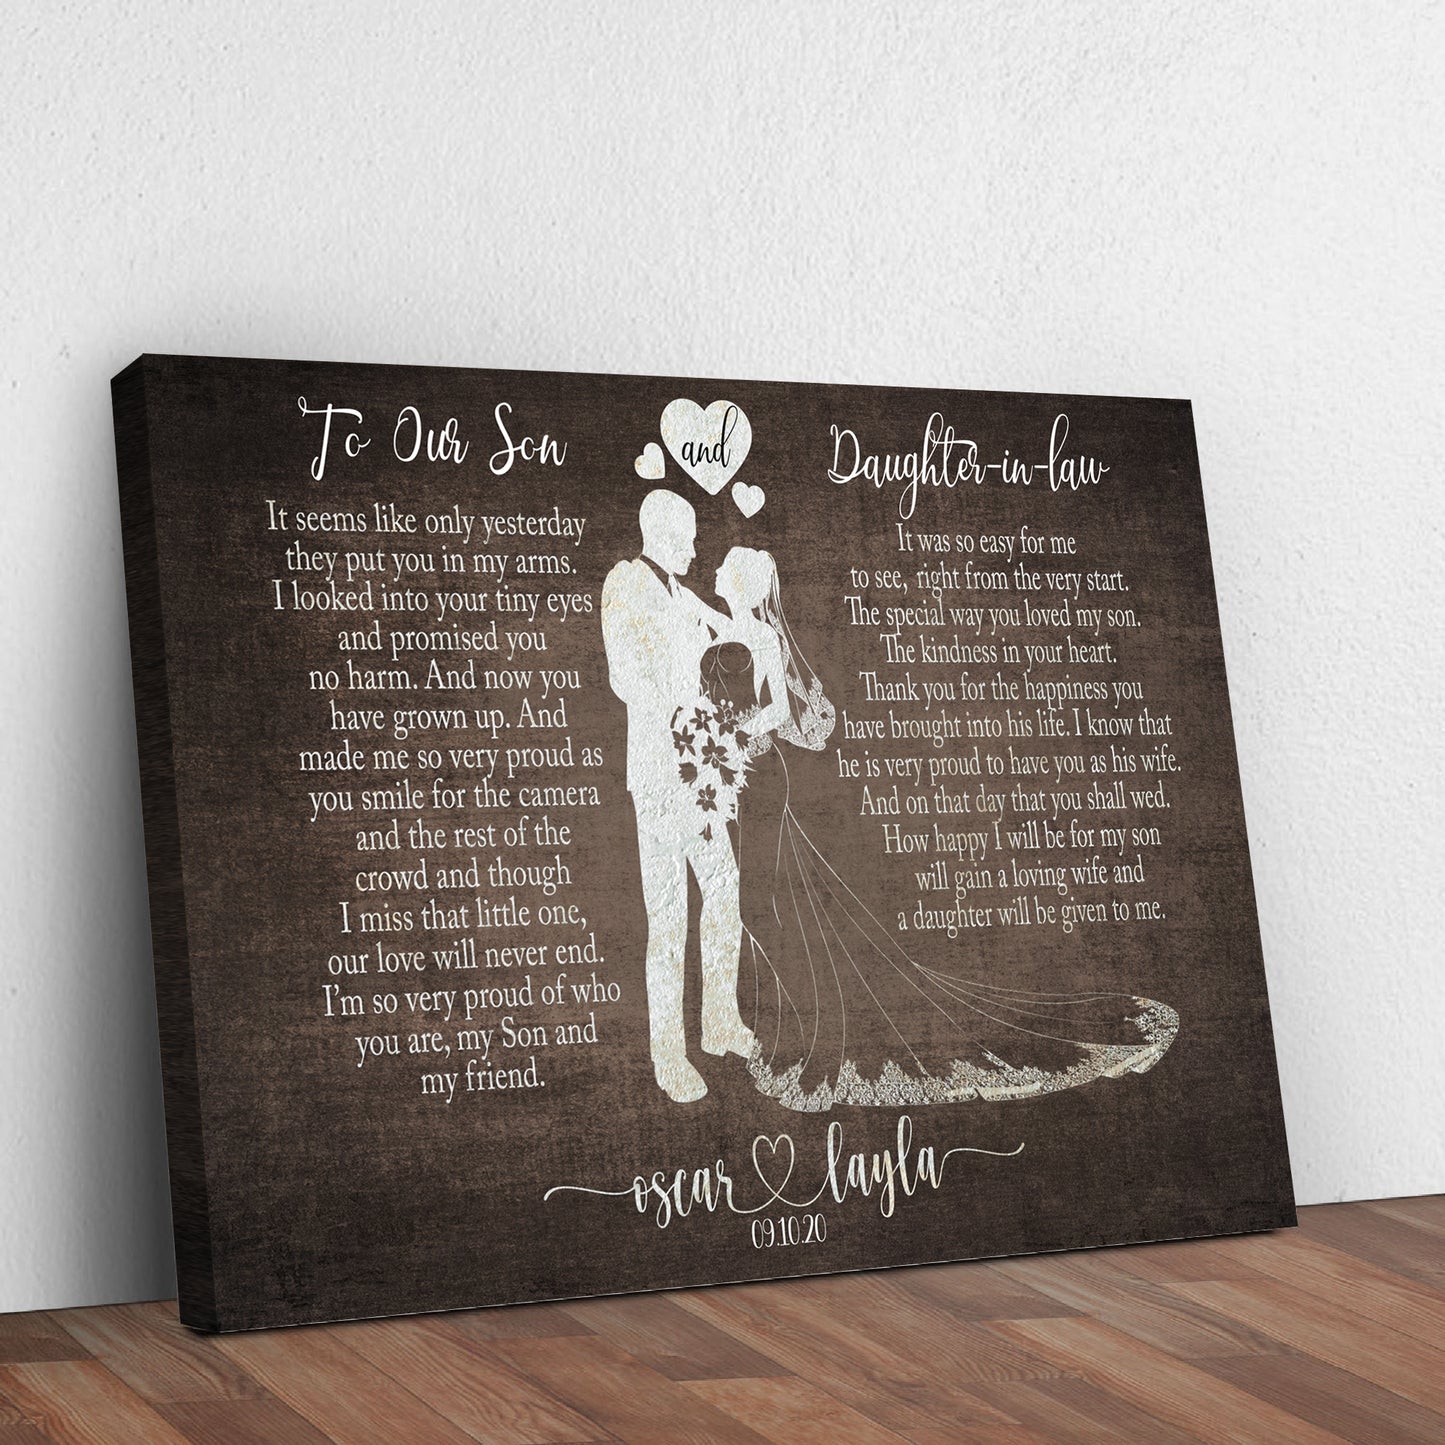 To My Son and Daughter in Law (Ready to hang) - Wall Art Image by Tailored Canvases